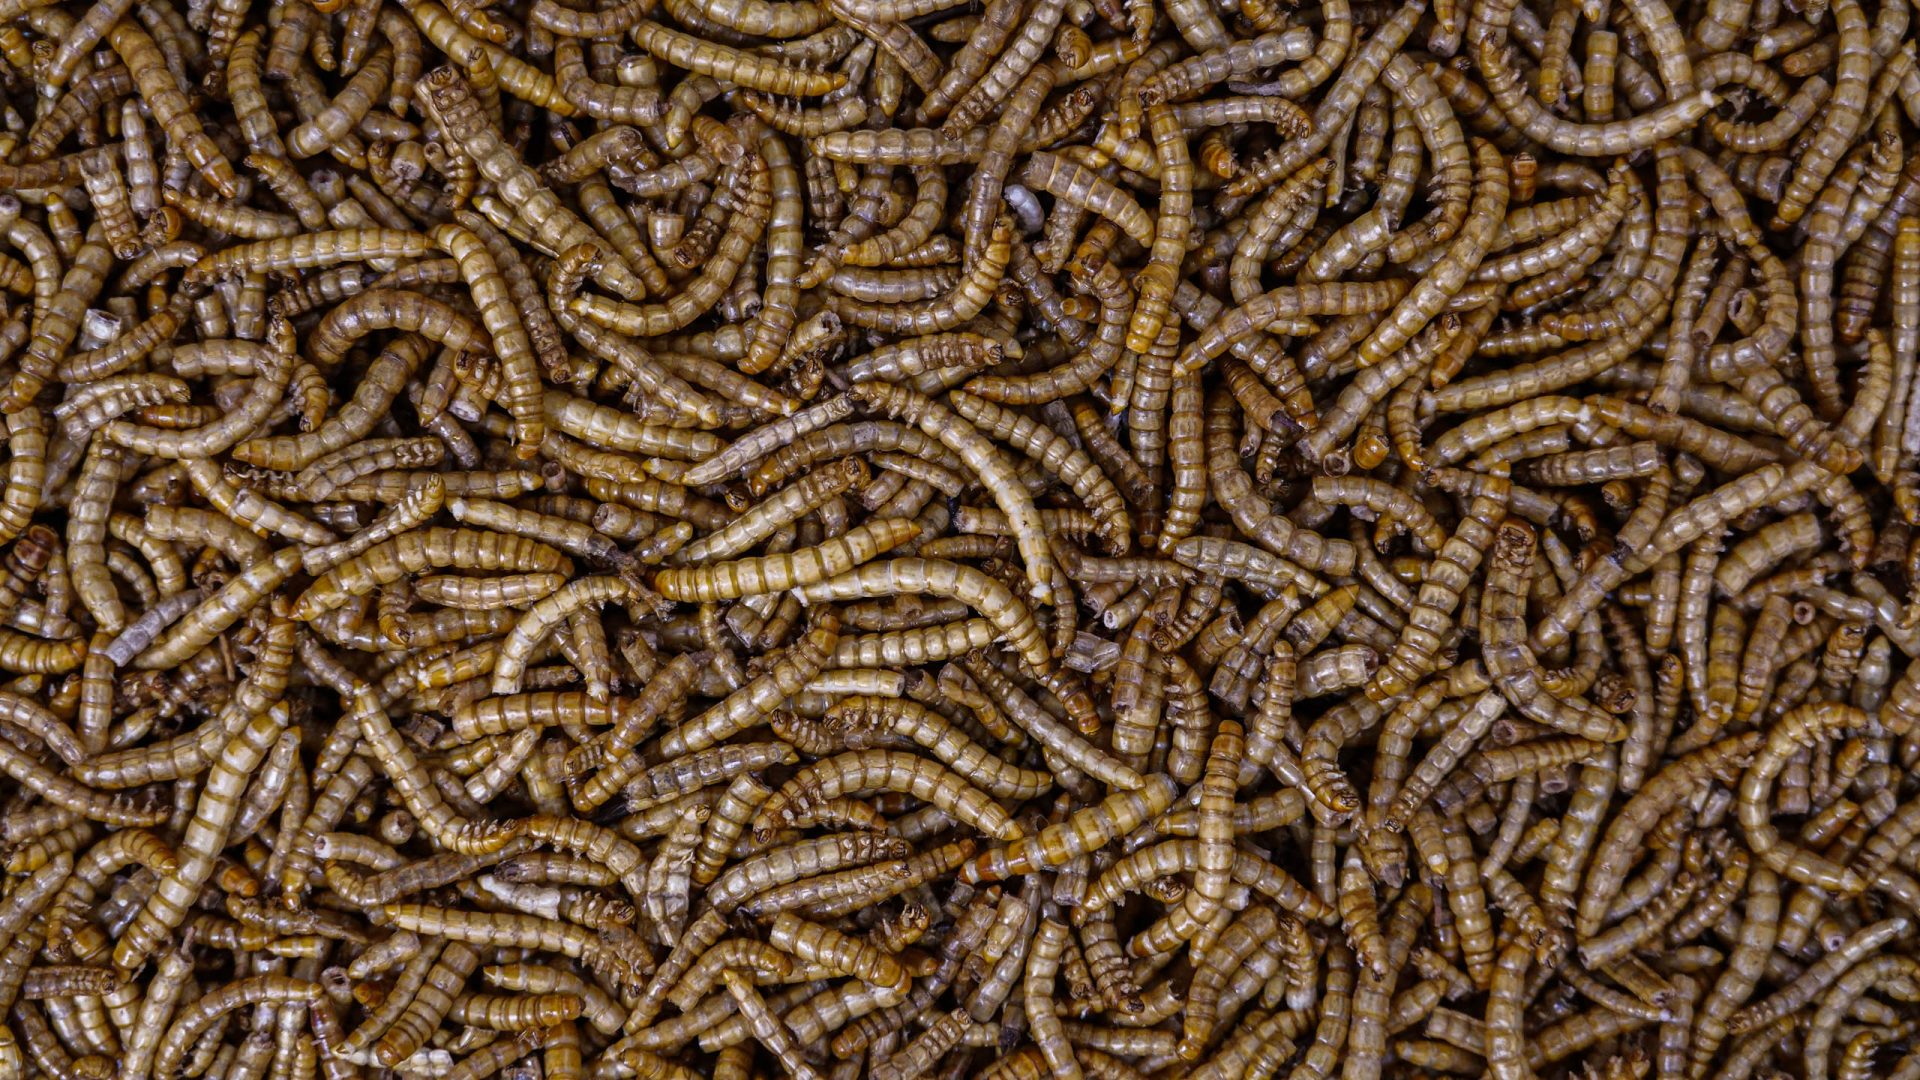 A bunch of mealworms